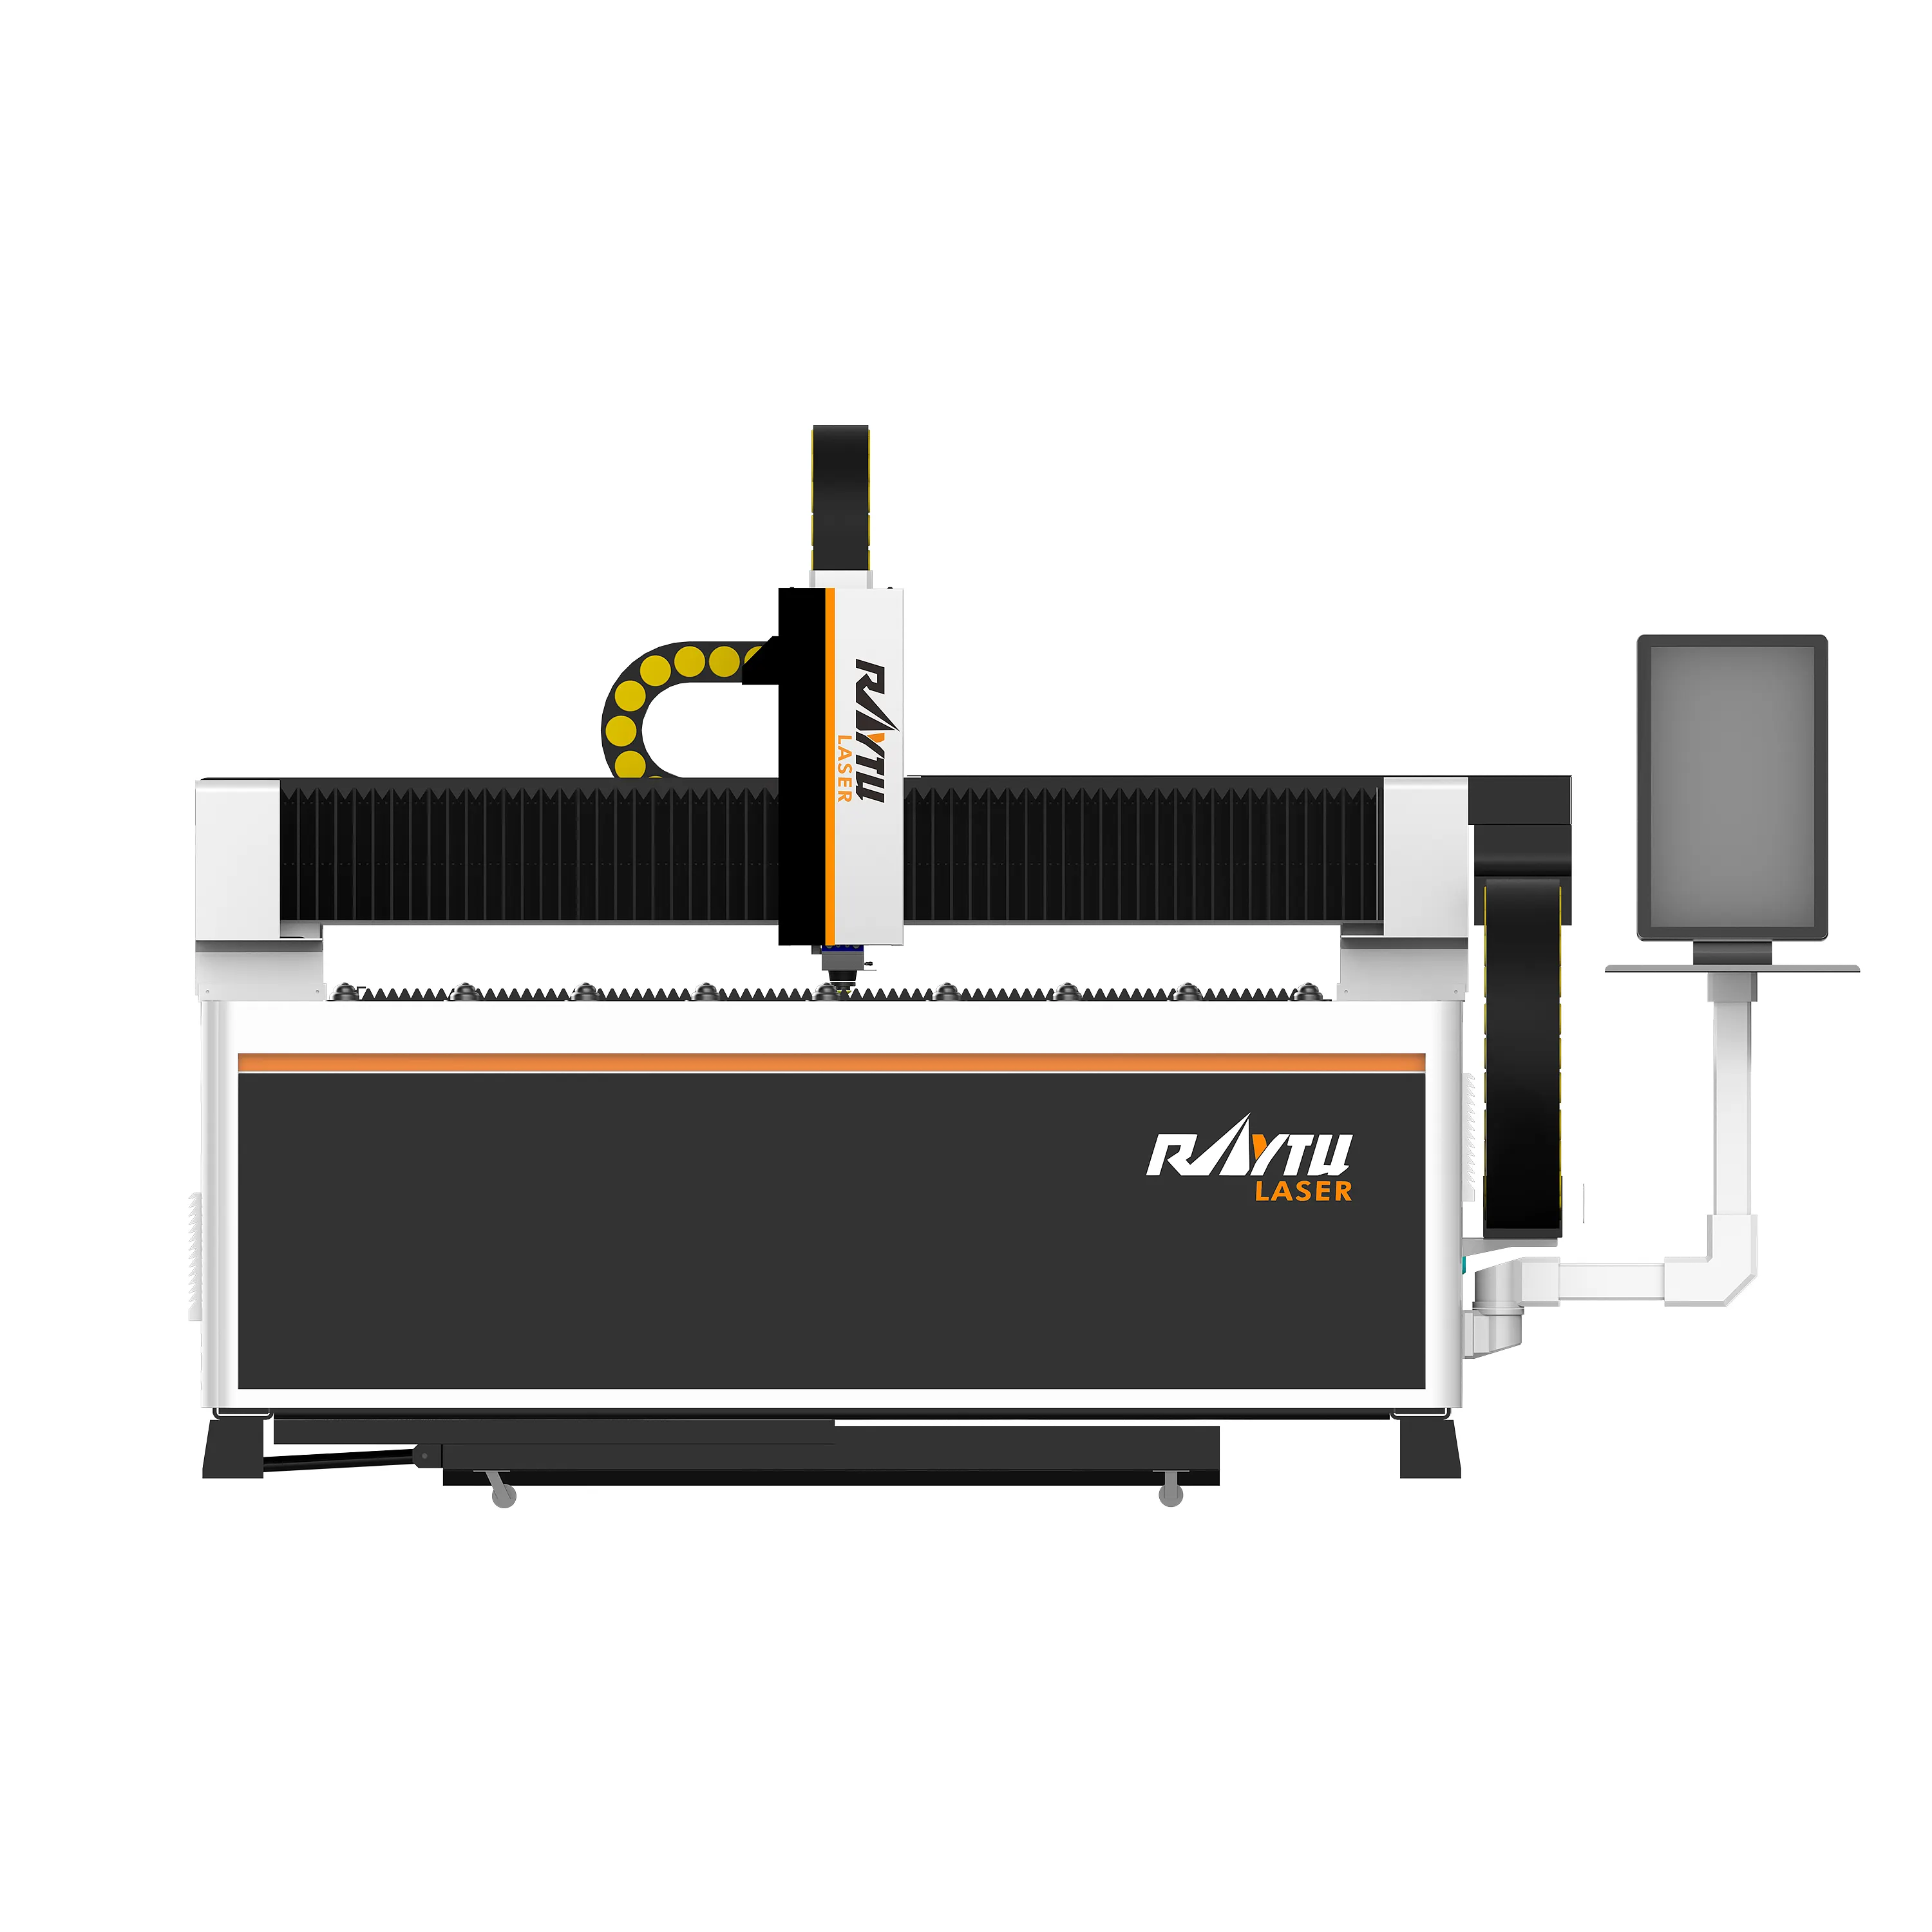 Raytu A series metal laser cutting machine with Affordable Price